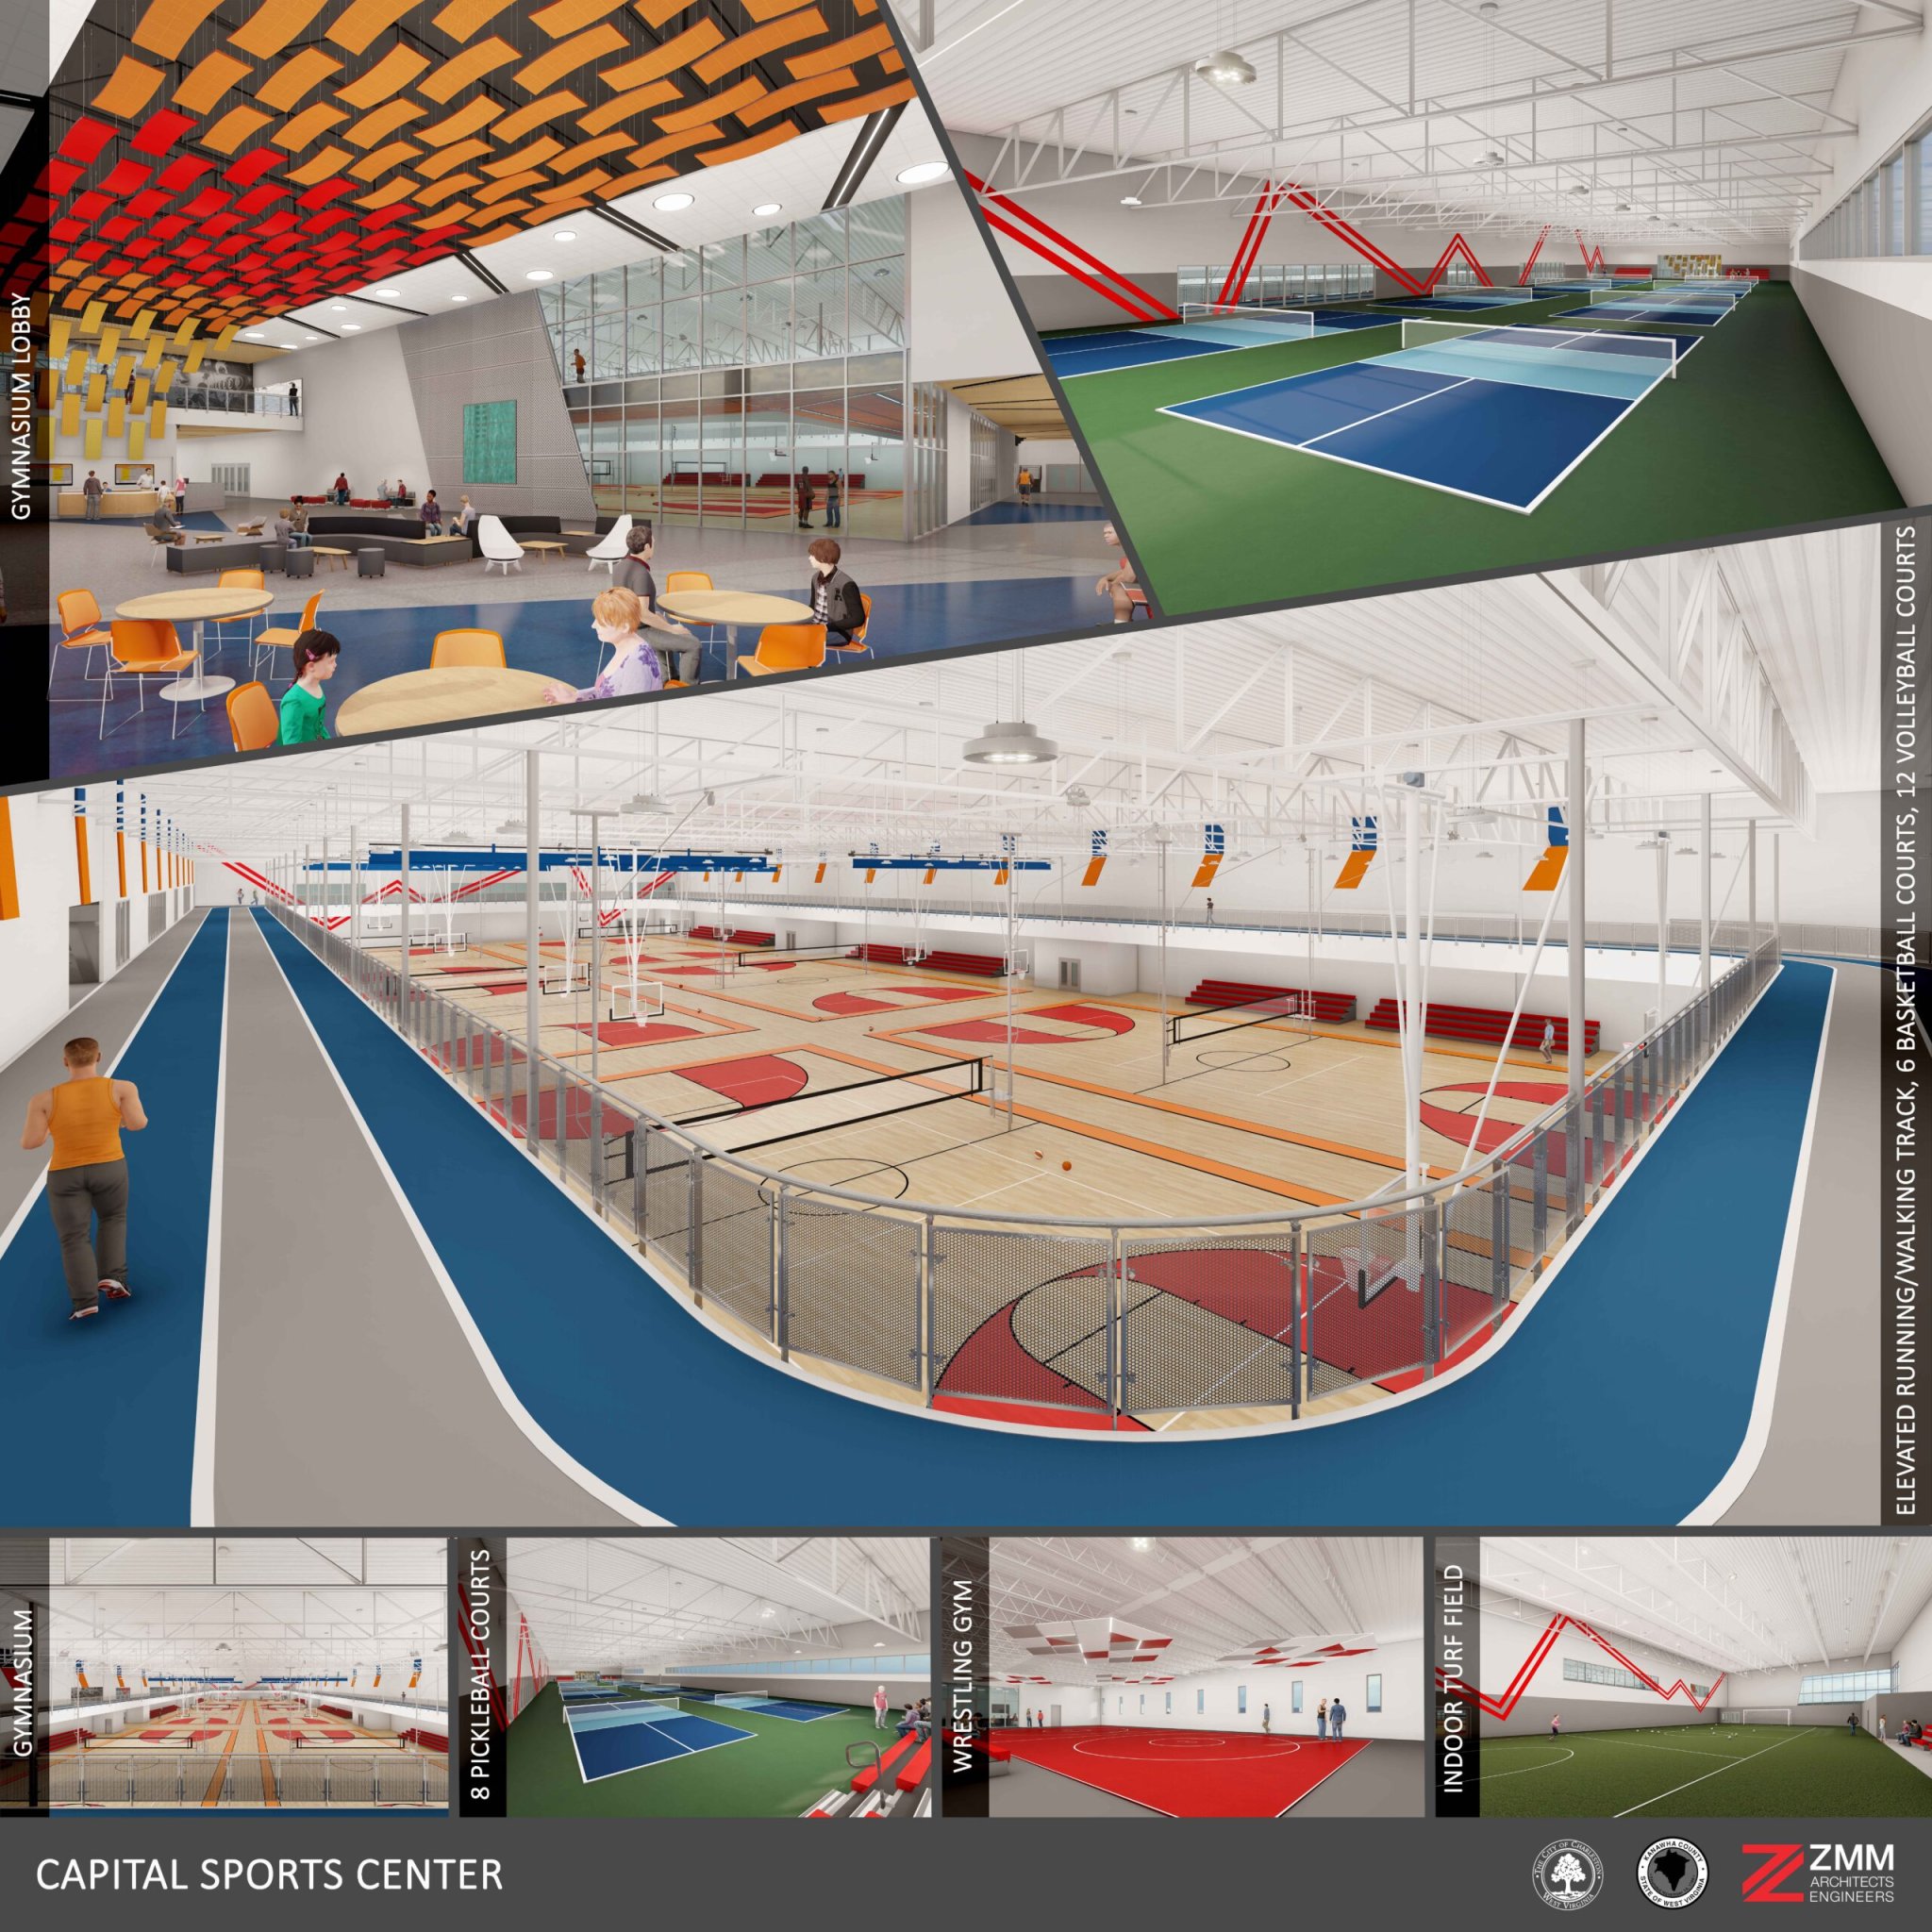 Creating an 'OpenTable for athletic facilities